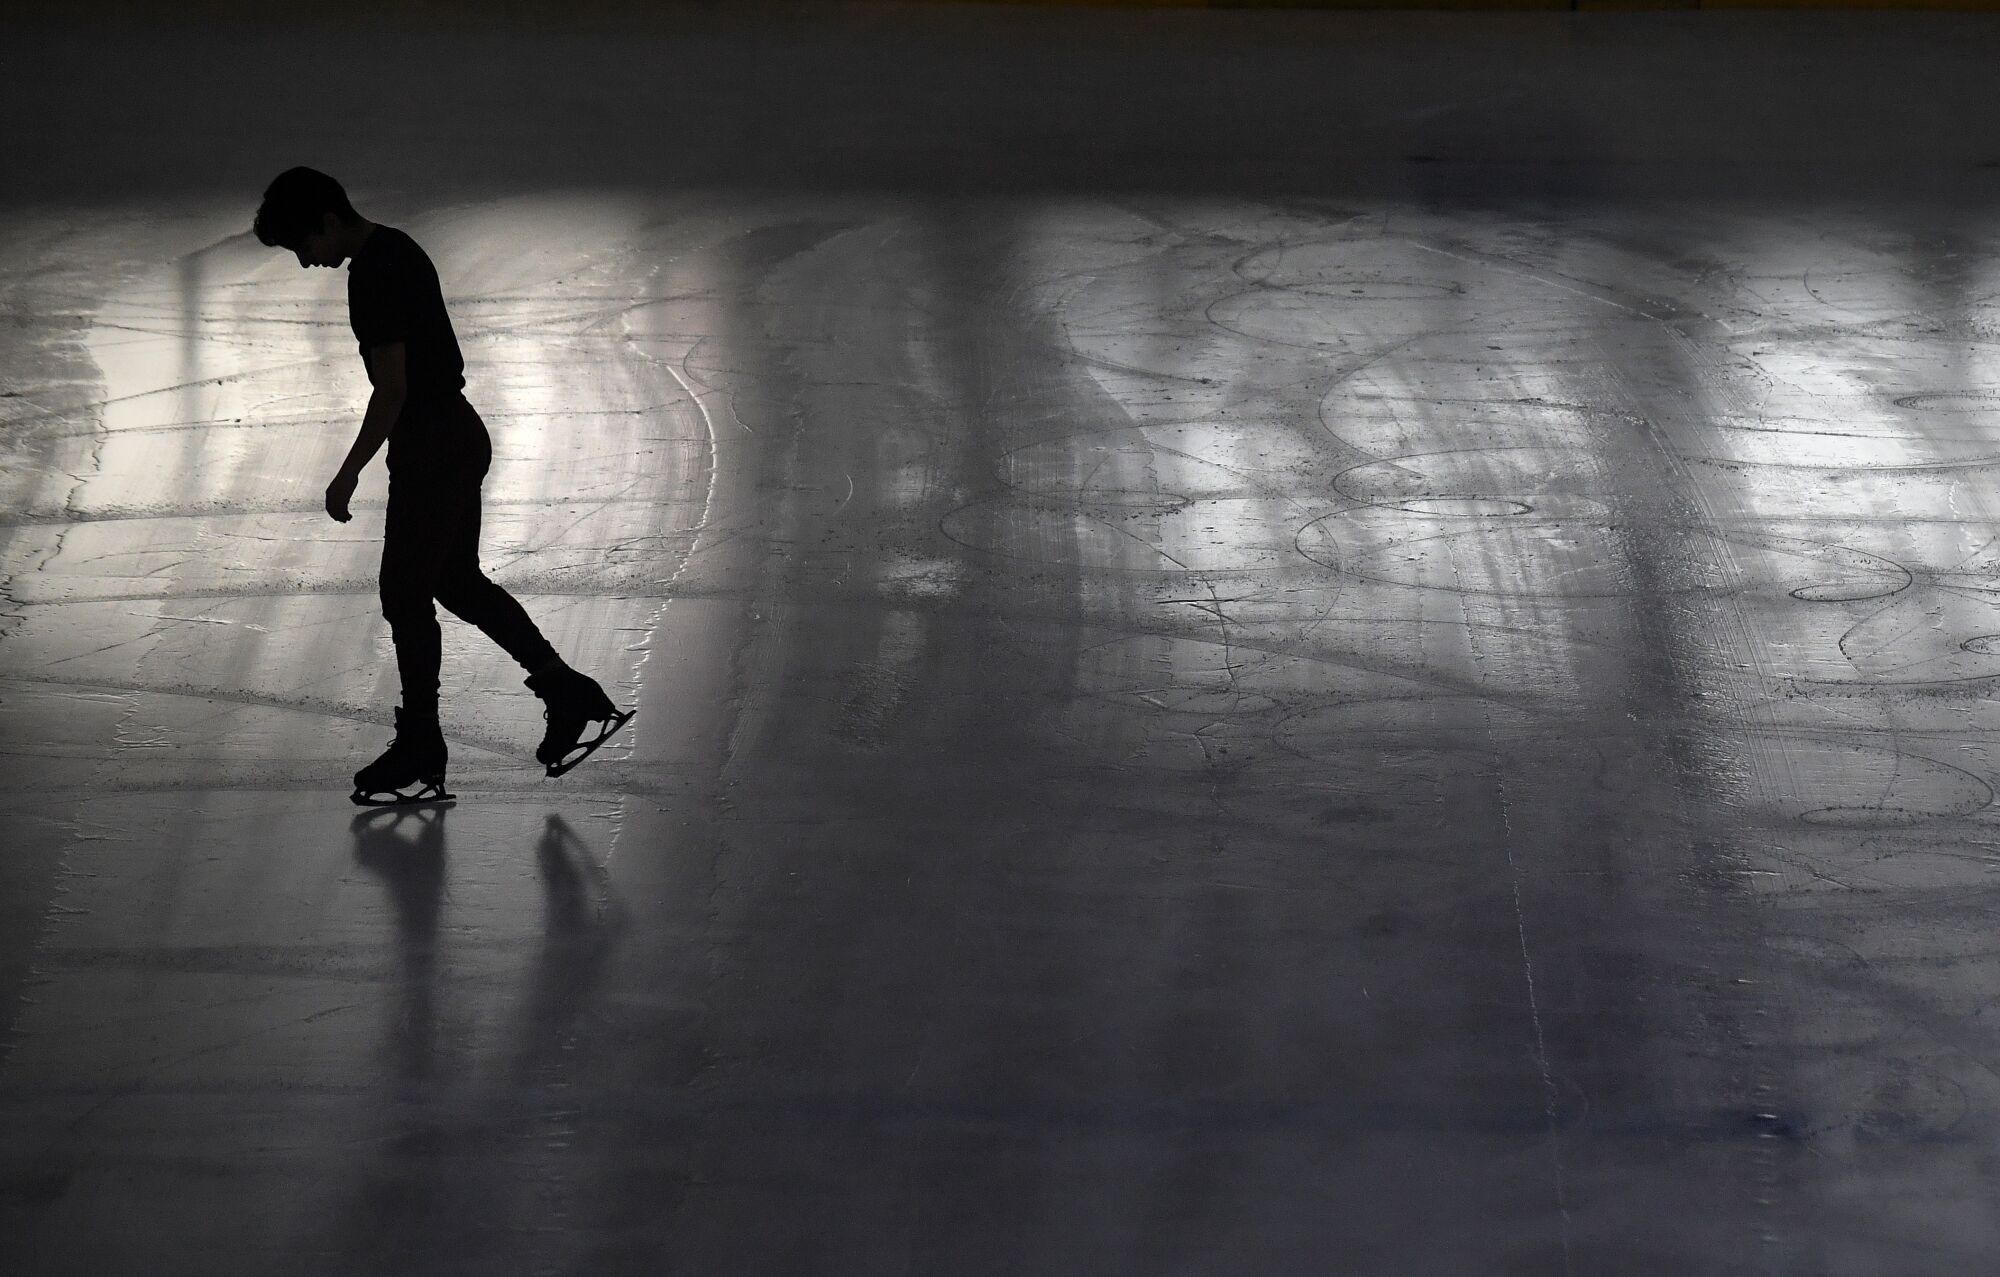 Mexican figure skater Donovan Carrillo warms-up before practice.